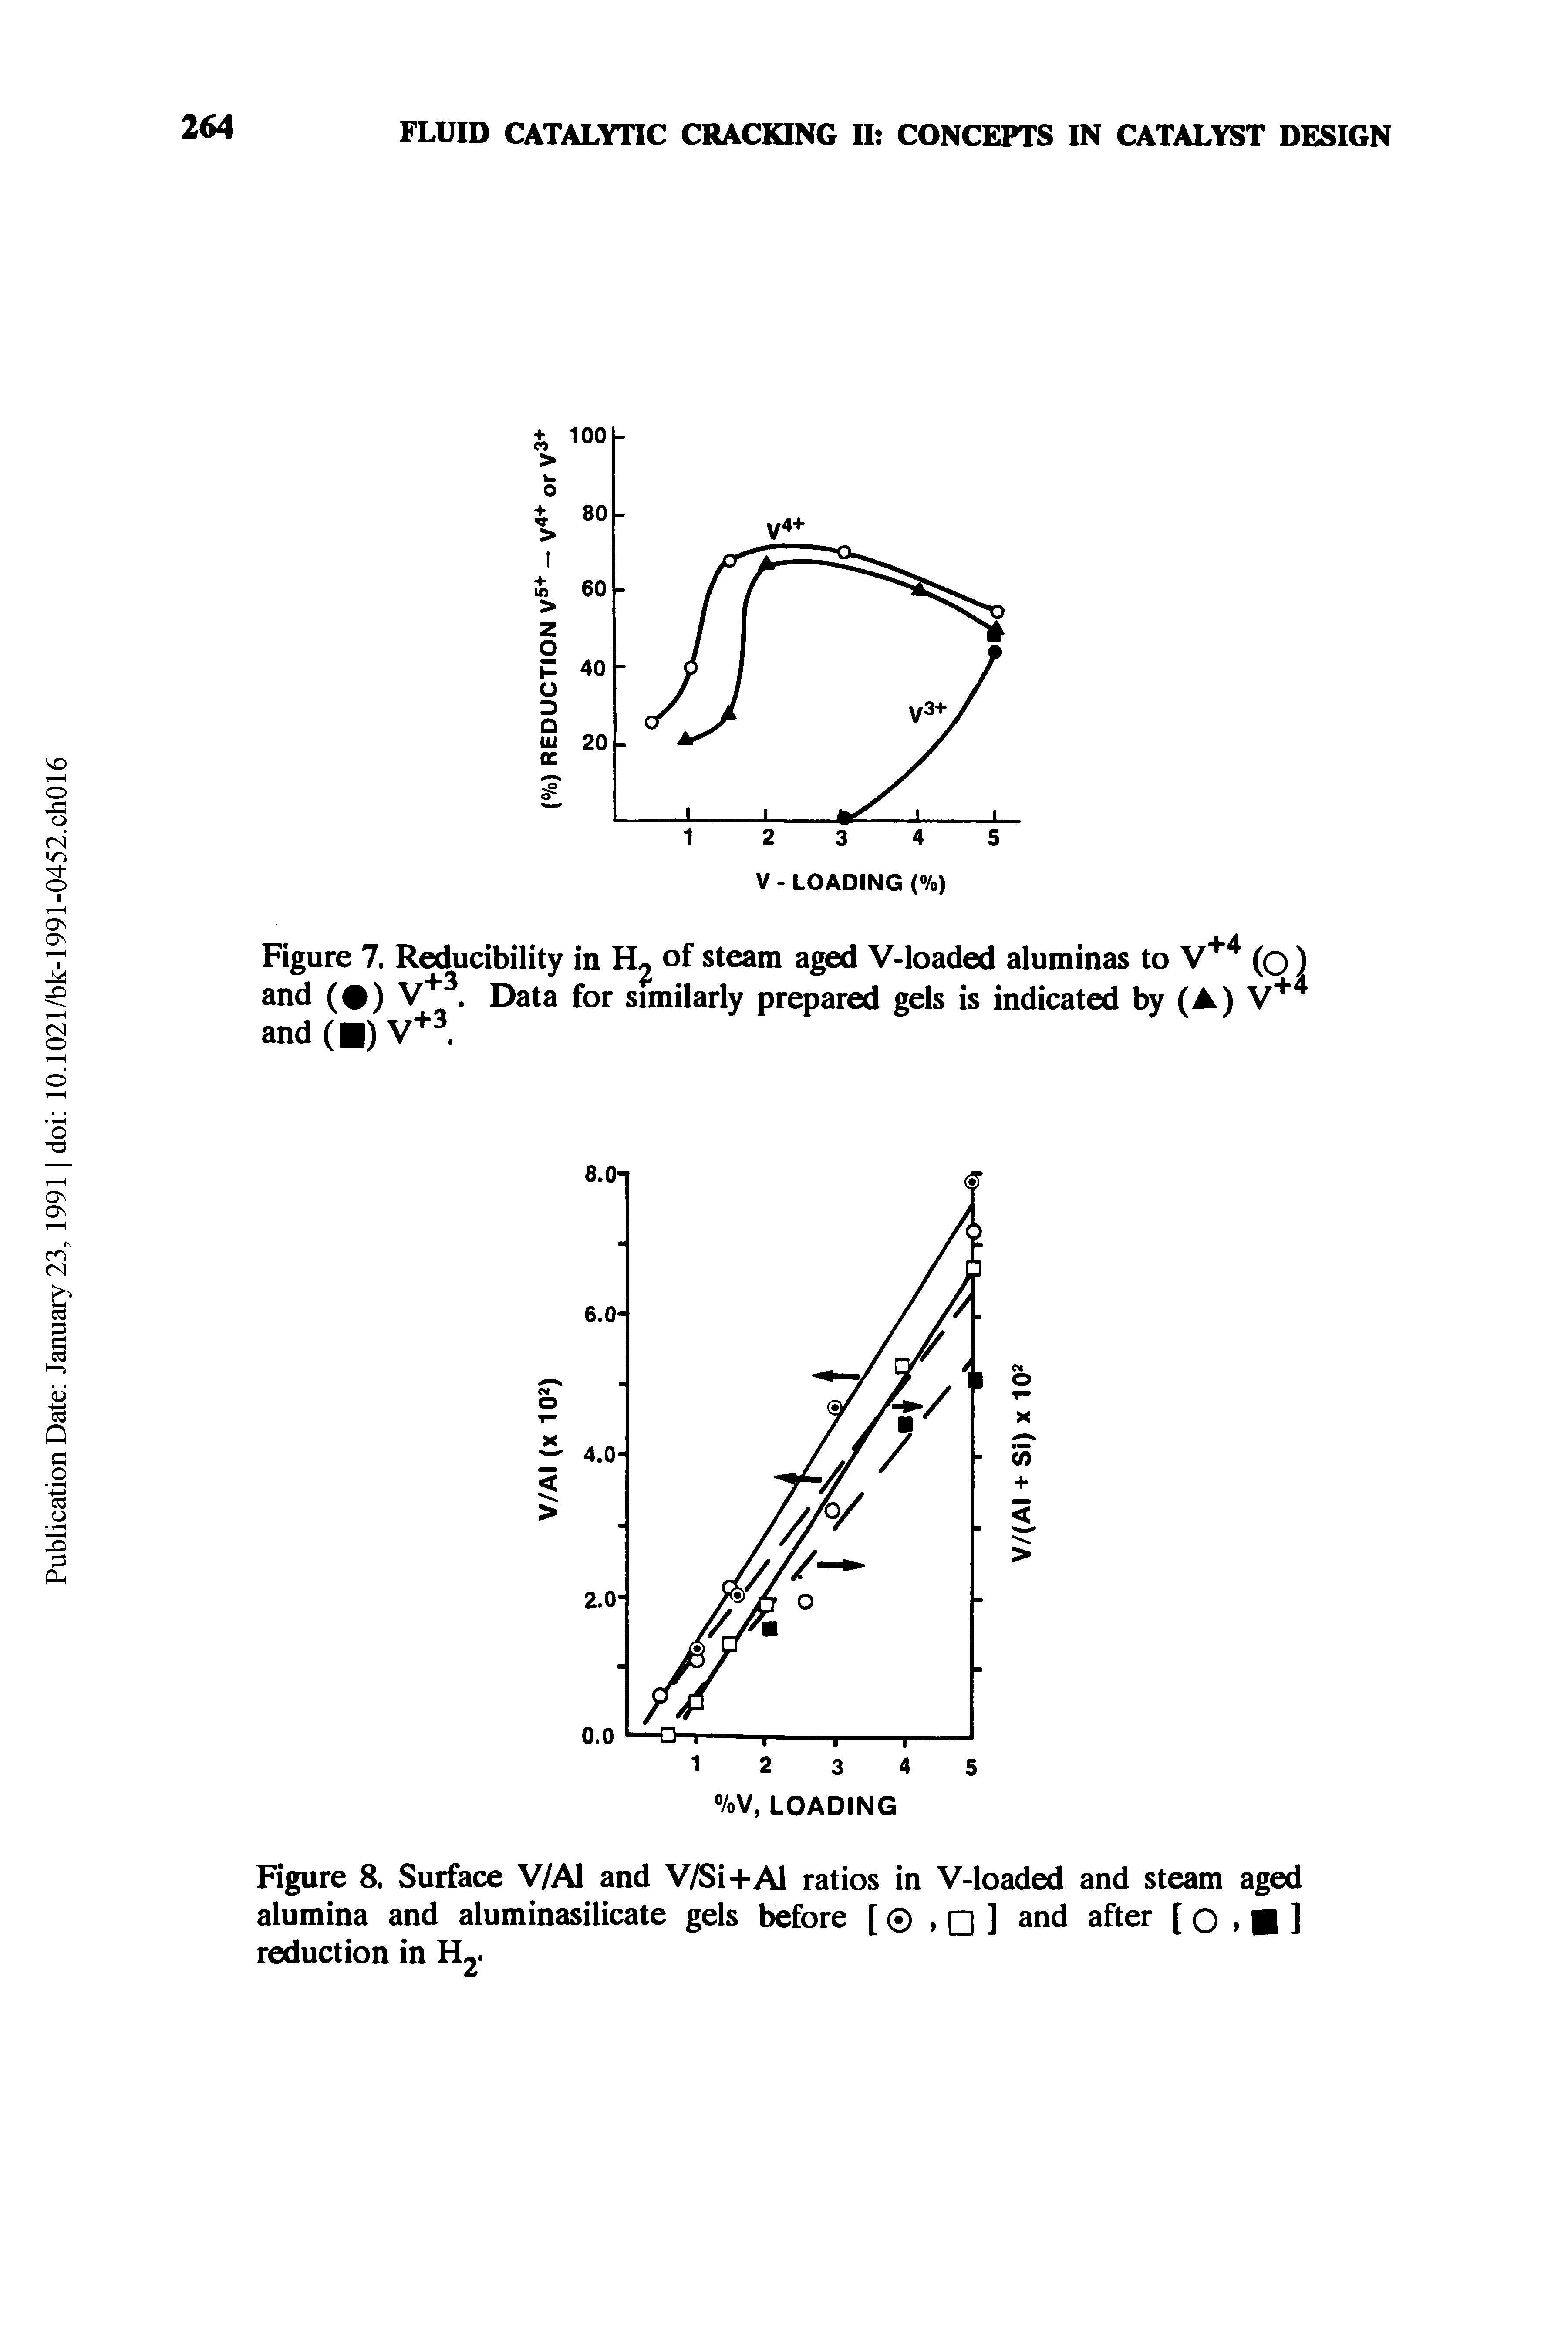 Figure 8. Surface V/Al and V/Si+Al ratios in V-loaded and steam aged alumina and aluminasilicate gels before [ , ] and after [ o > ] reduction in H2-...